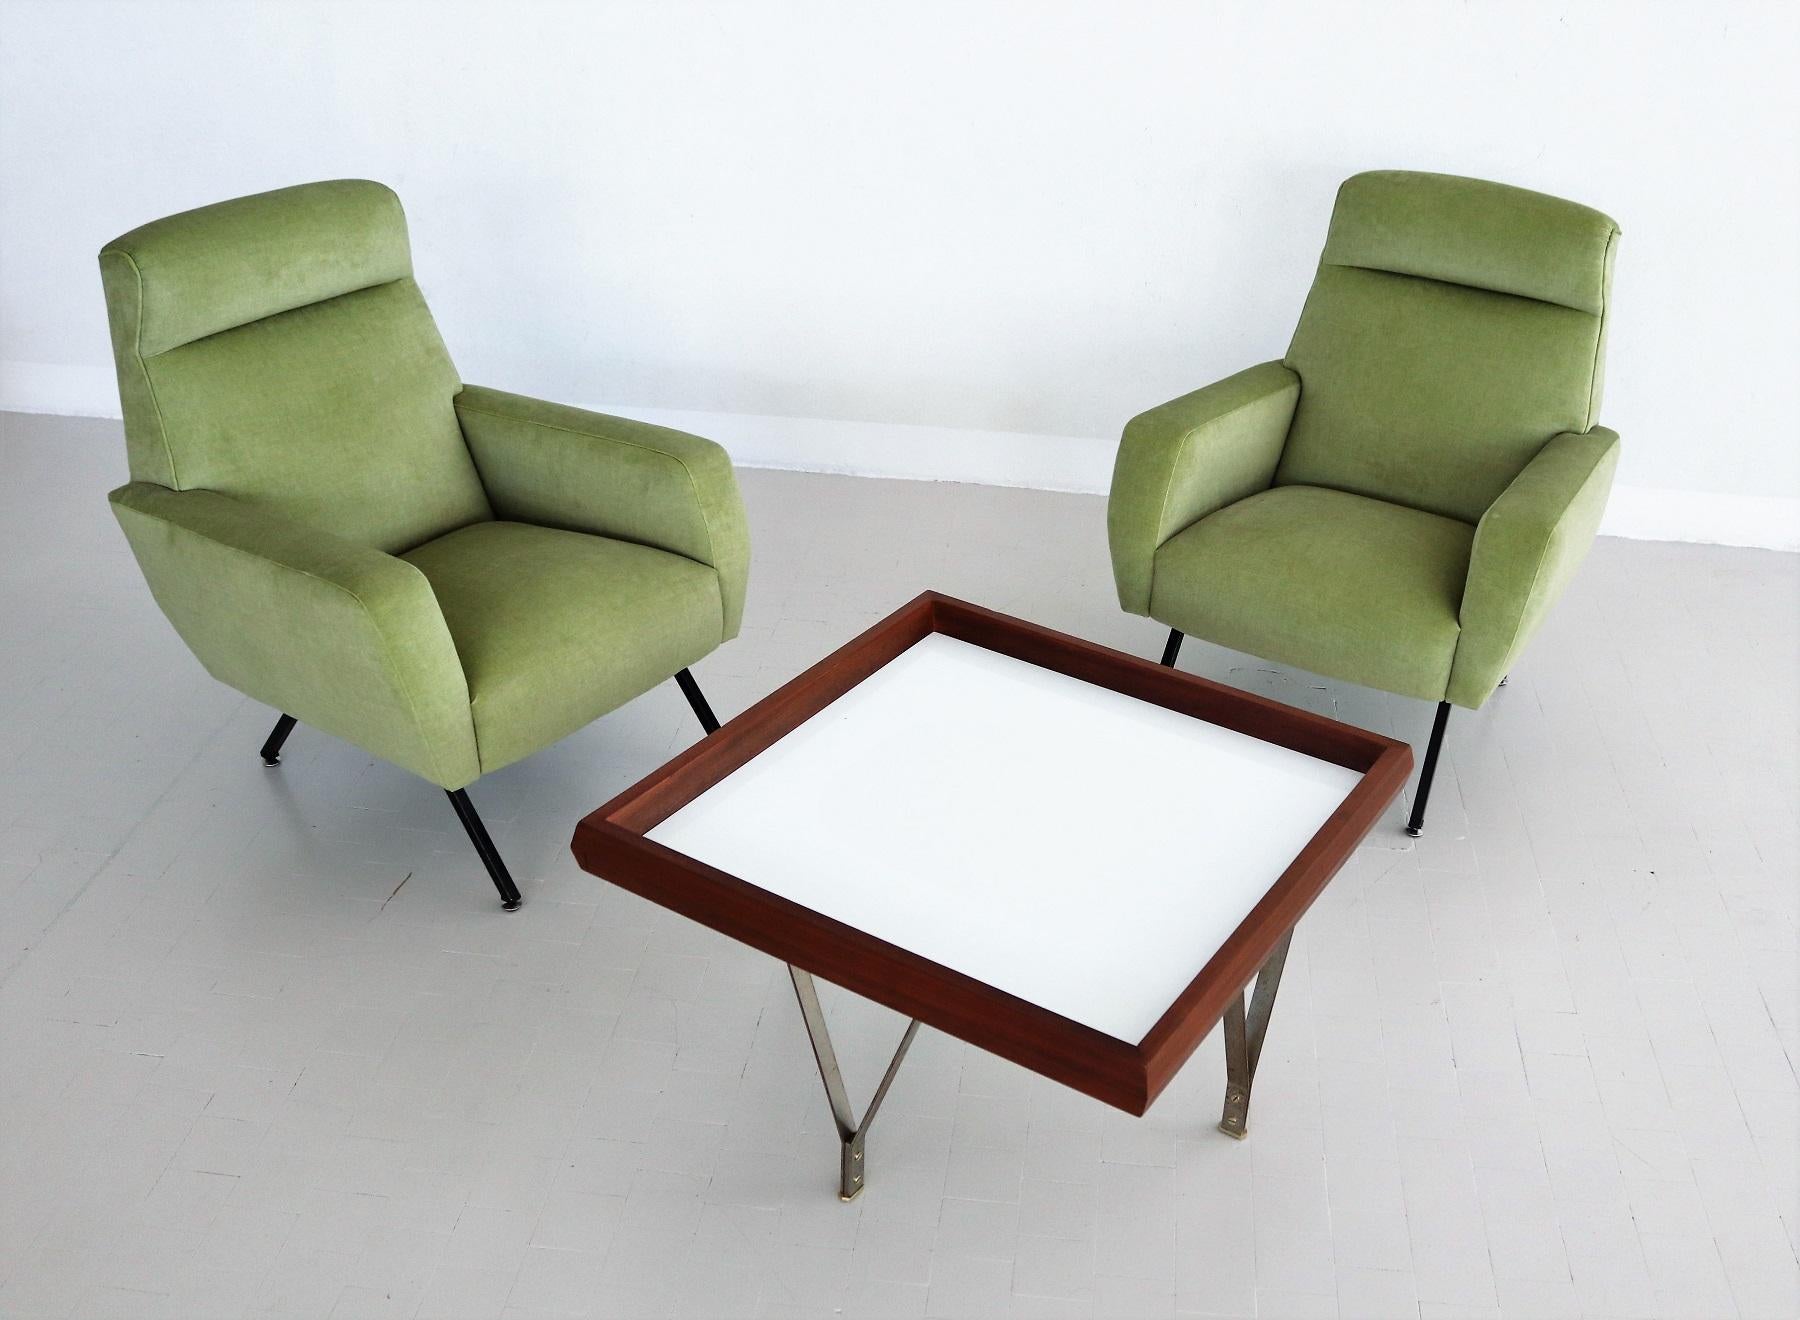 Mid-20th Century Italian Midcentury Modern Coffee Table in Mahogany and Glass, 1960s